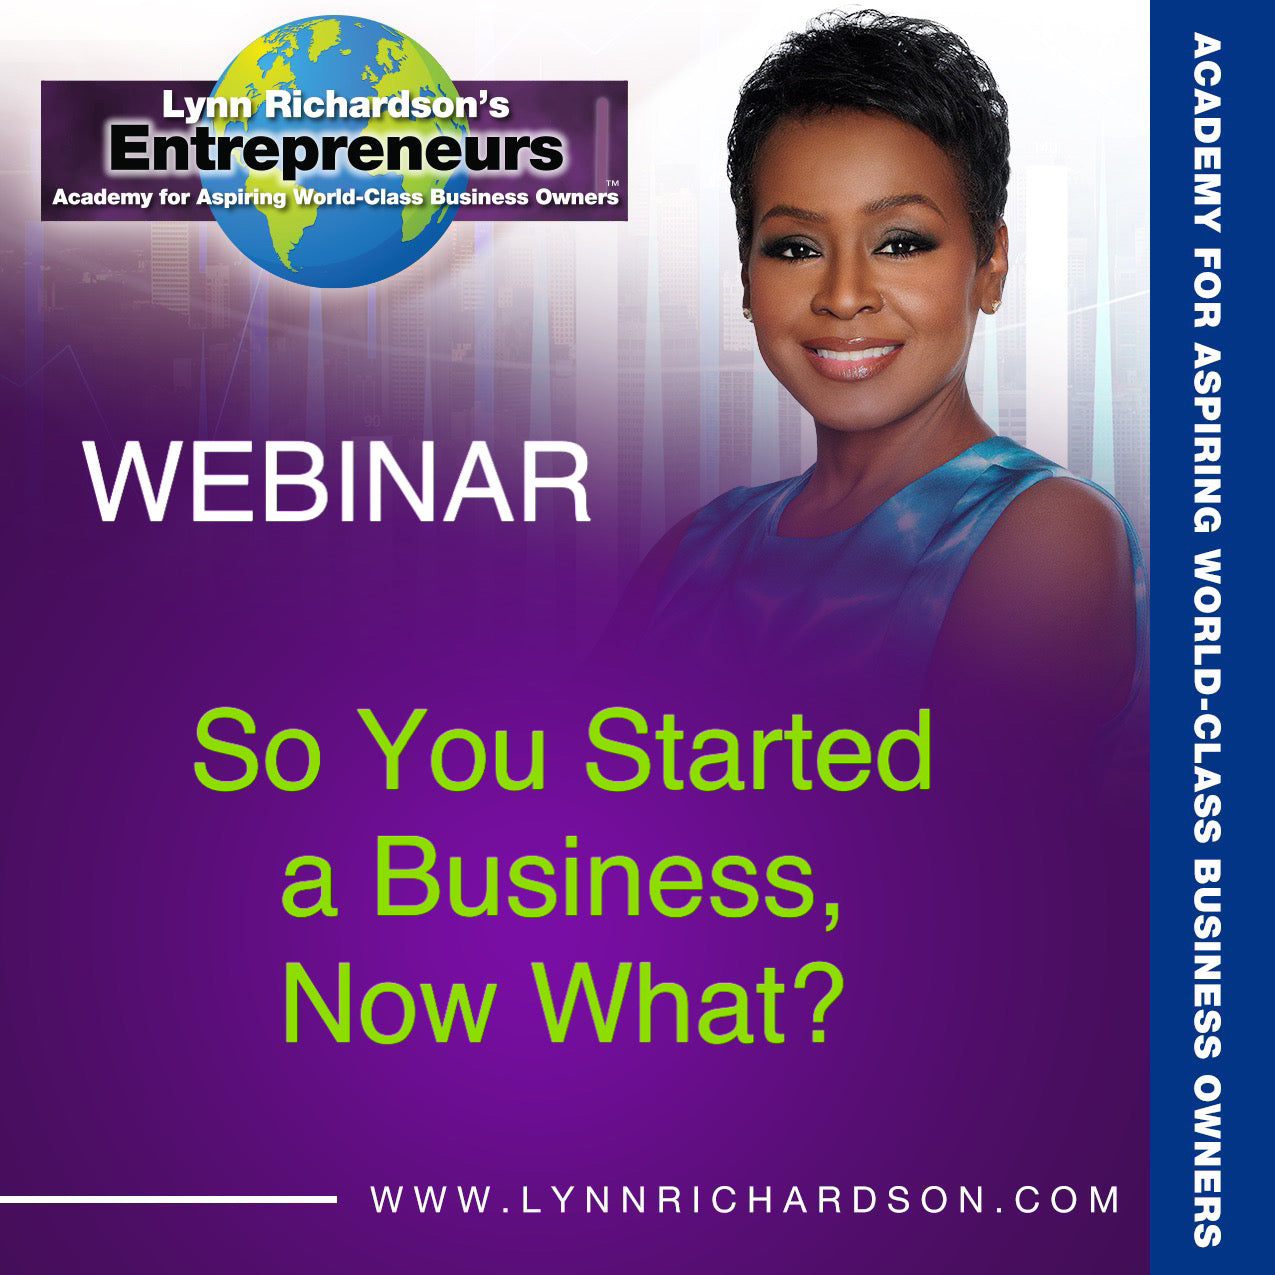 So You Started a Business, Now What?